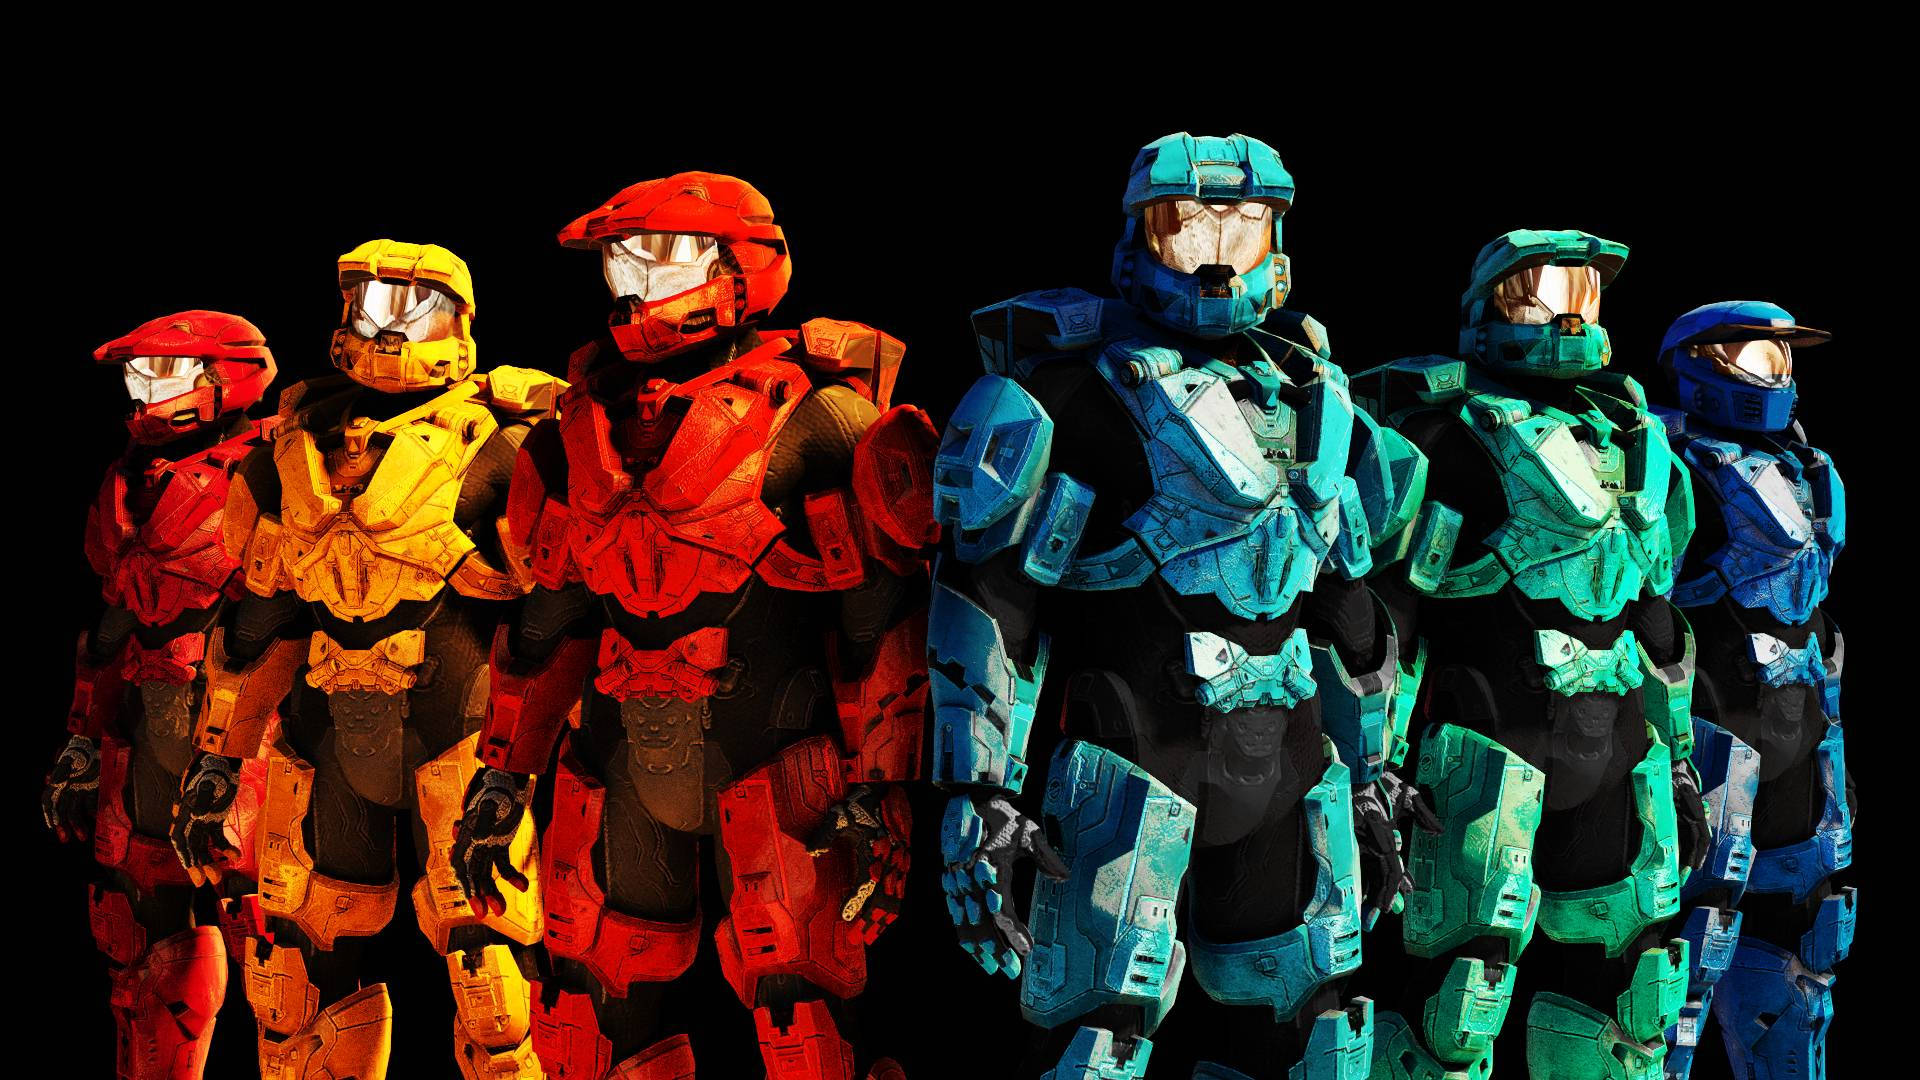 Top 999+ Red Vs Blue Wallpaper Full HD, 4K✅Free to Use